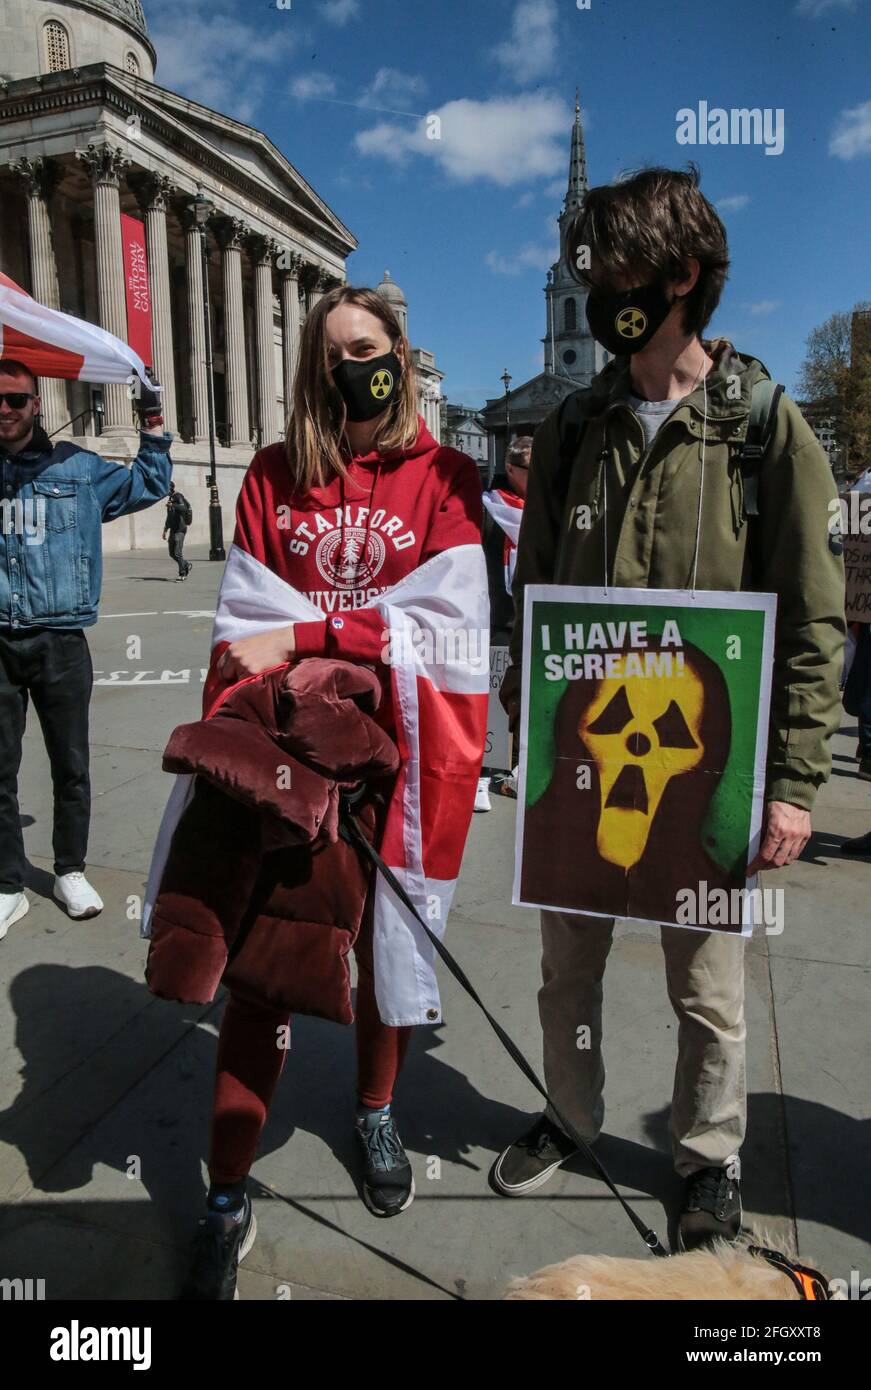 London, UK. 25th Apr, 2021. With 99 per cent of the land of Belarus contaminated to varying degrees, the people of this stricken country are forced to live, eat, drink and breathe radiation. today they remember 35 years since the disaster and ask for nuclear disarmament. Credit: Paul Quezada-Neiman/Alamy Live News Stock Photo